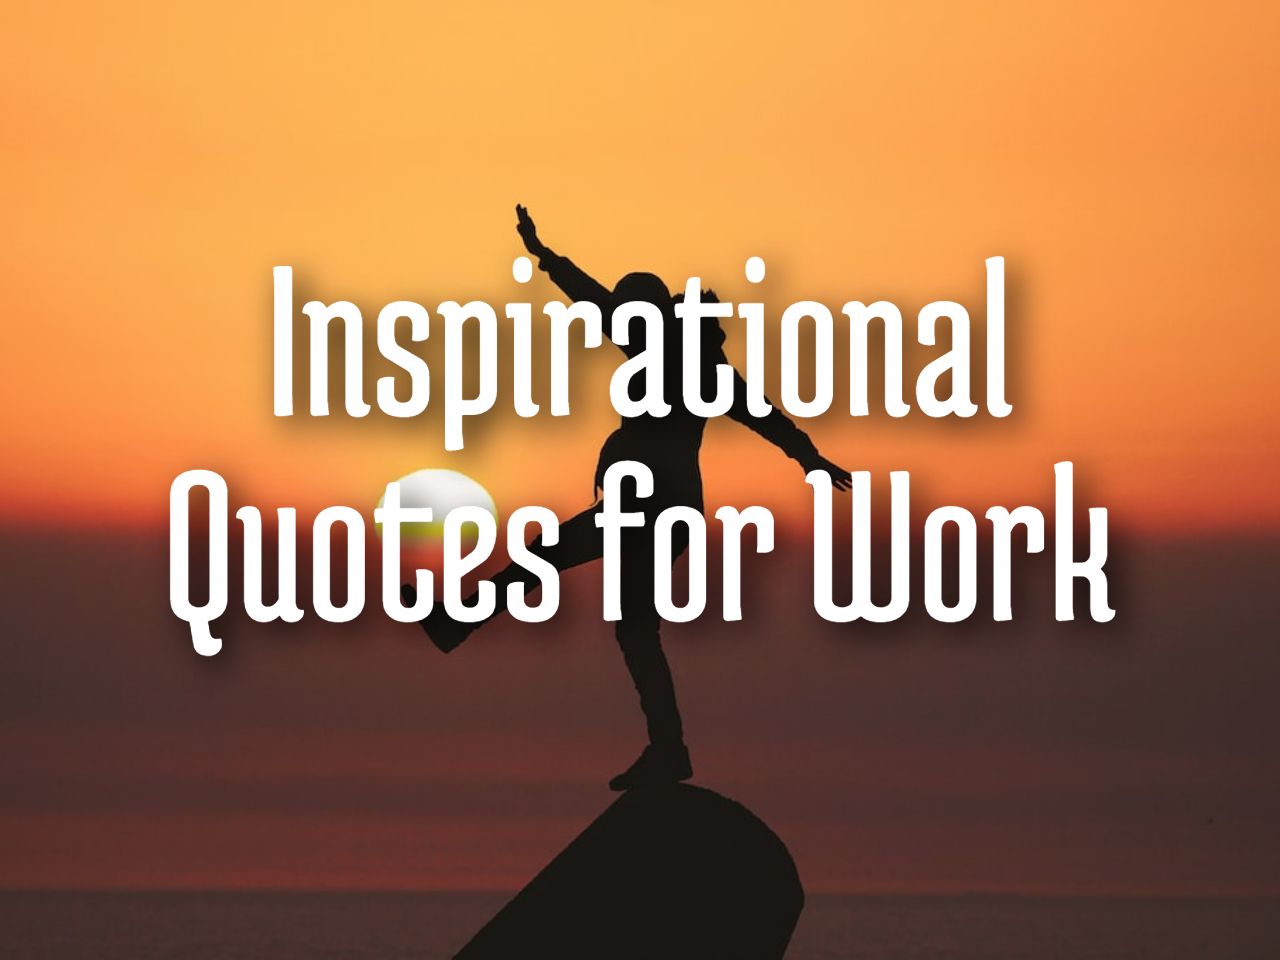 53 Inspirational Quotes for Work To Keep You Motivated in 2023